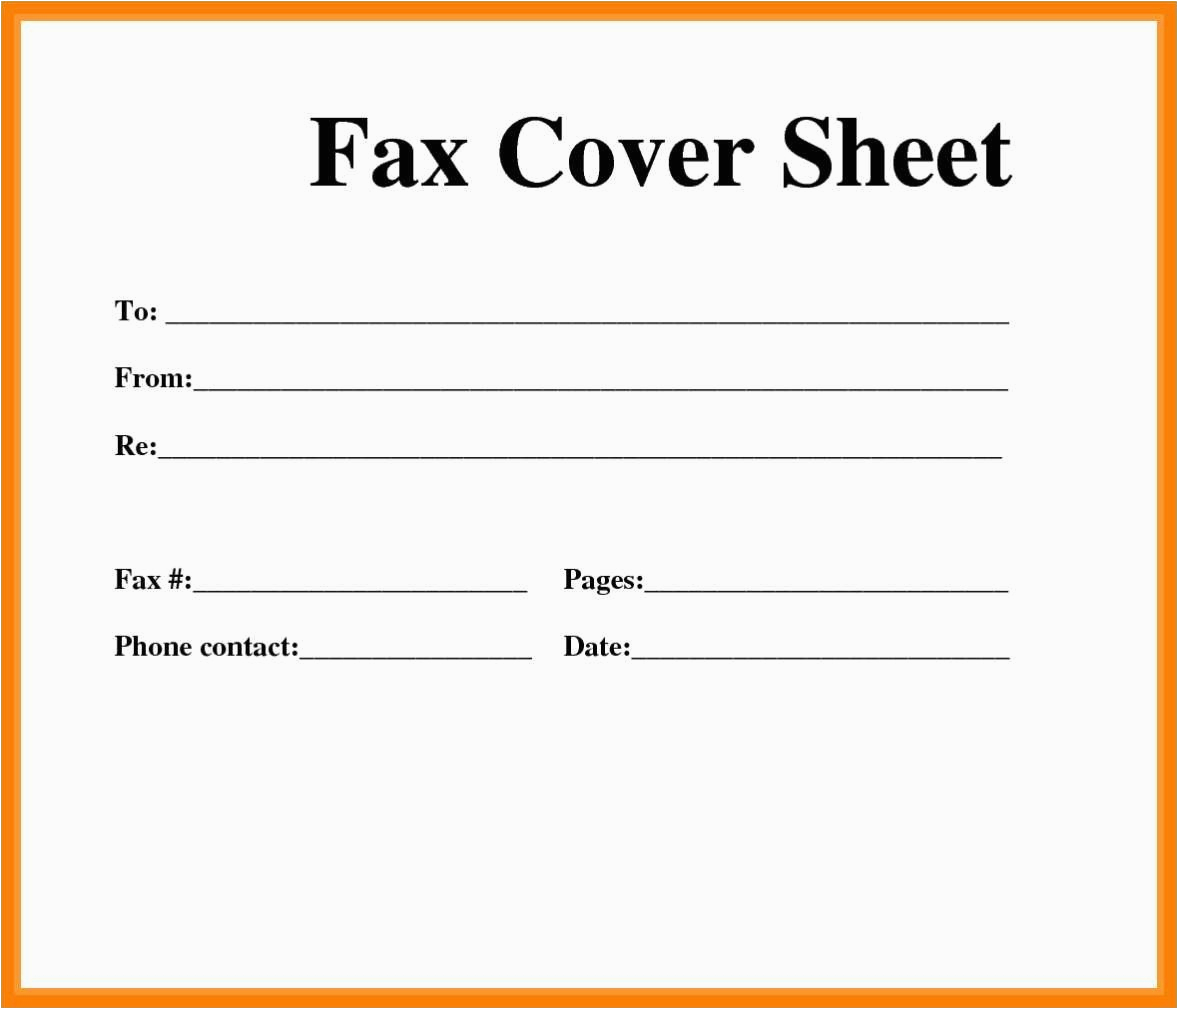 free fax cover sheet template free printable fax cover sheet pdf